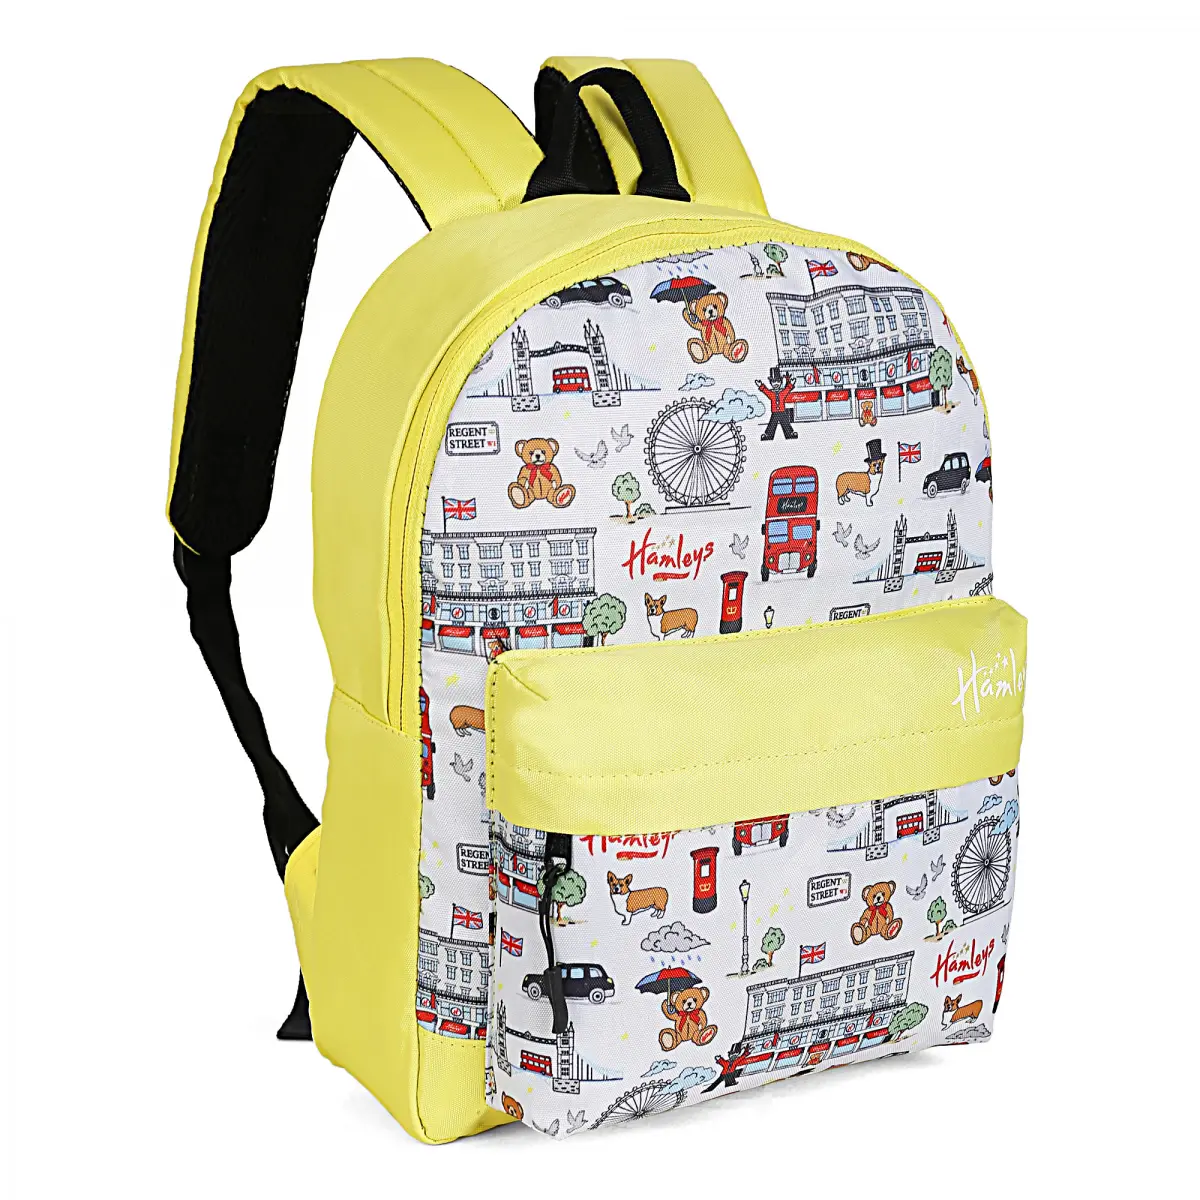 Hamleys School Bag Pack for Kids, 14Inches, Yellow, 12Y+